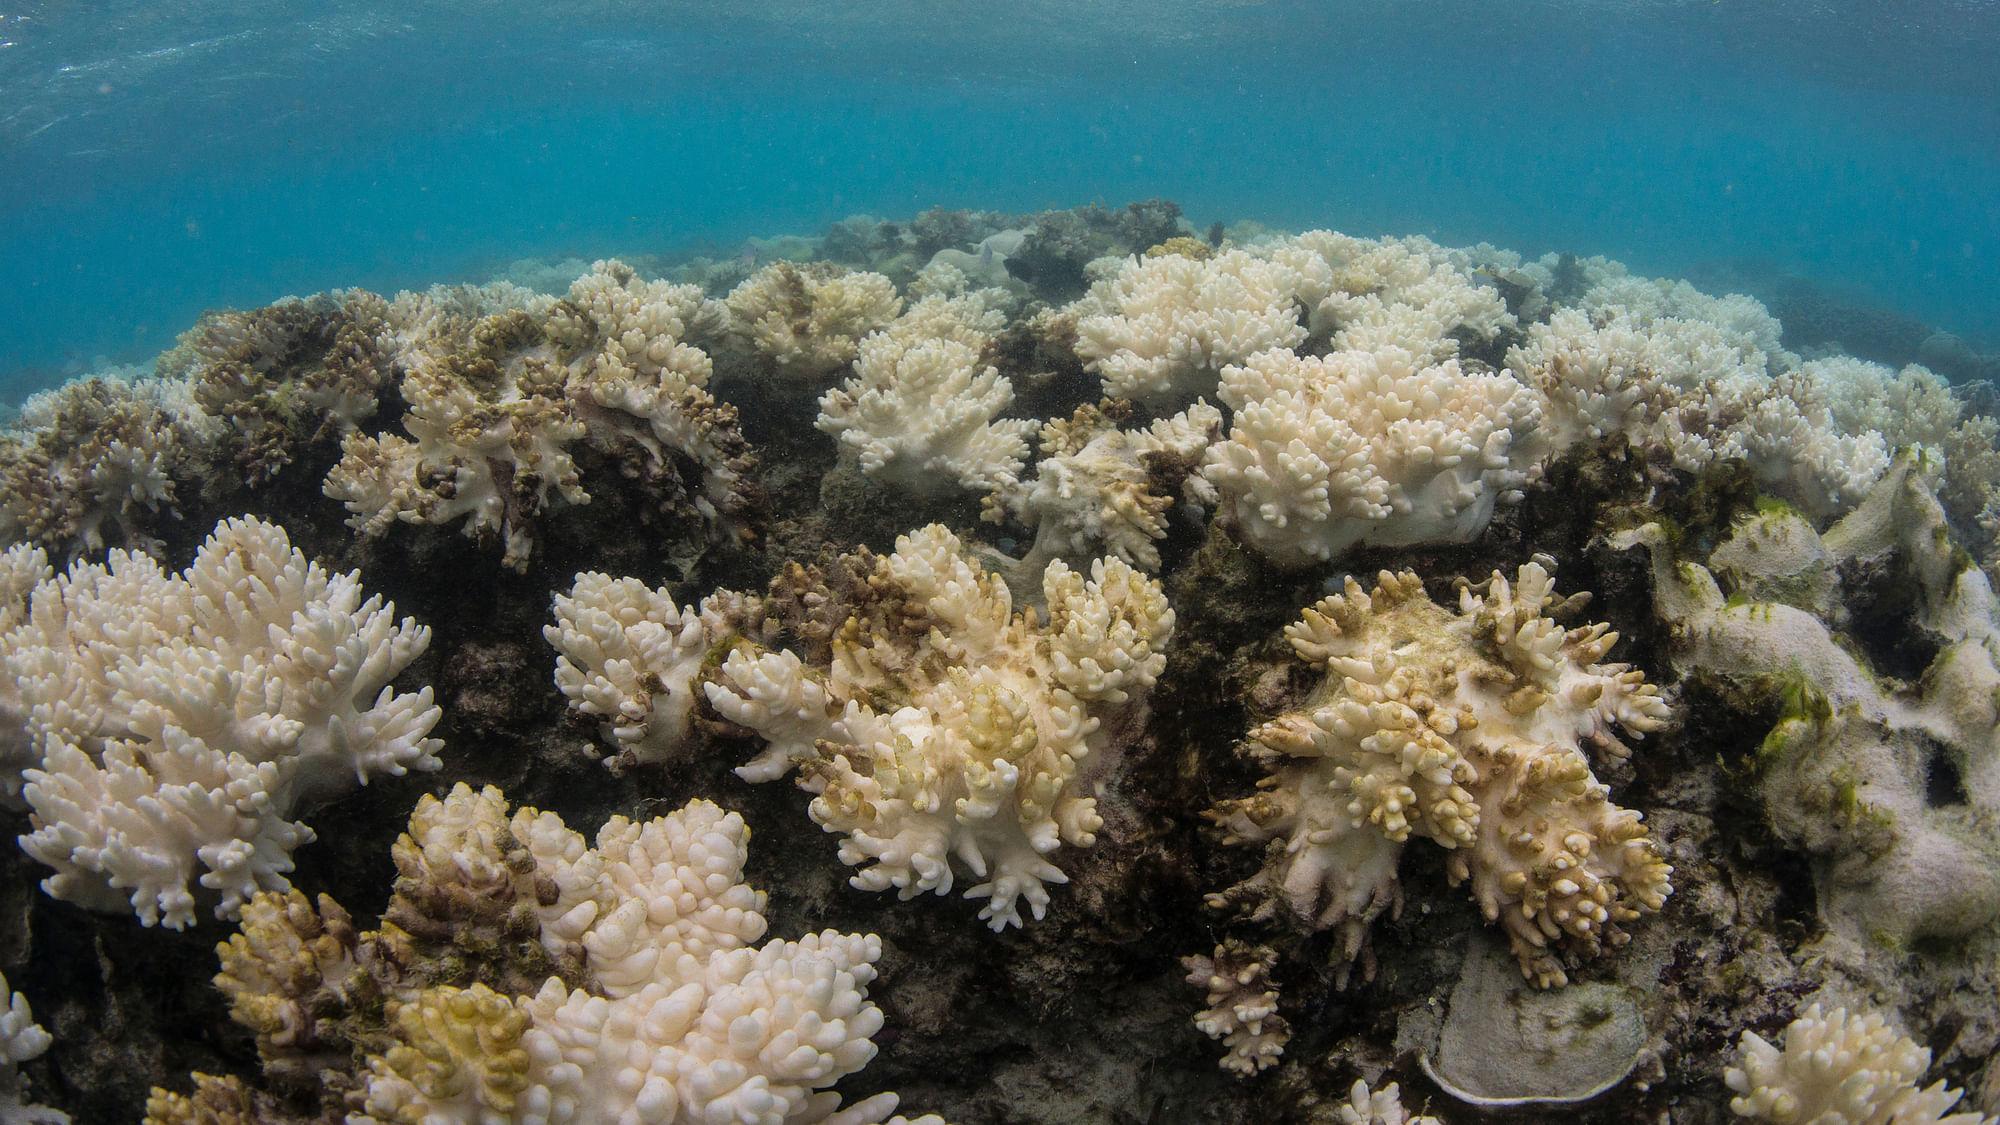 Decomposing corals at Lizard Island, Great Barrier Reef. (Photo Courtesy:<a href="http://www.globalcoralbleaching.org/#essential-facts"> XL Catlin Seaview Survey</a>) 